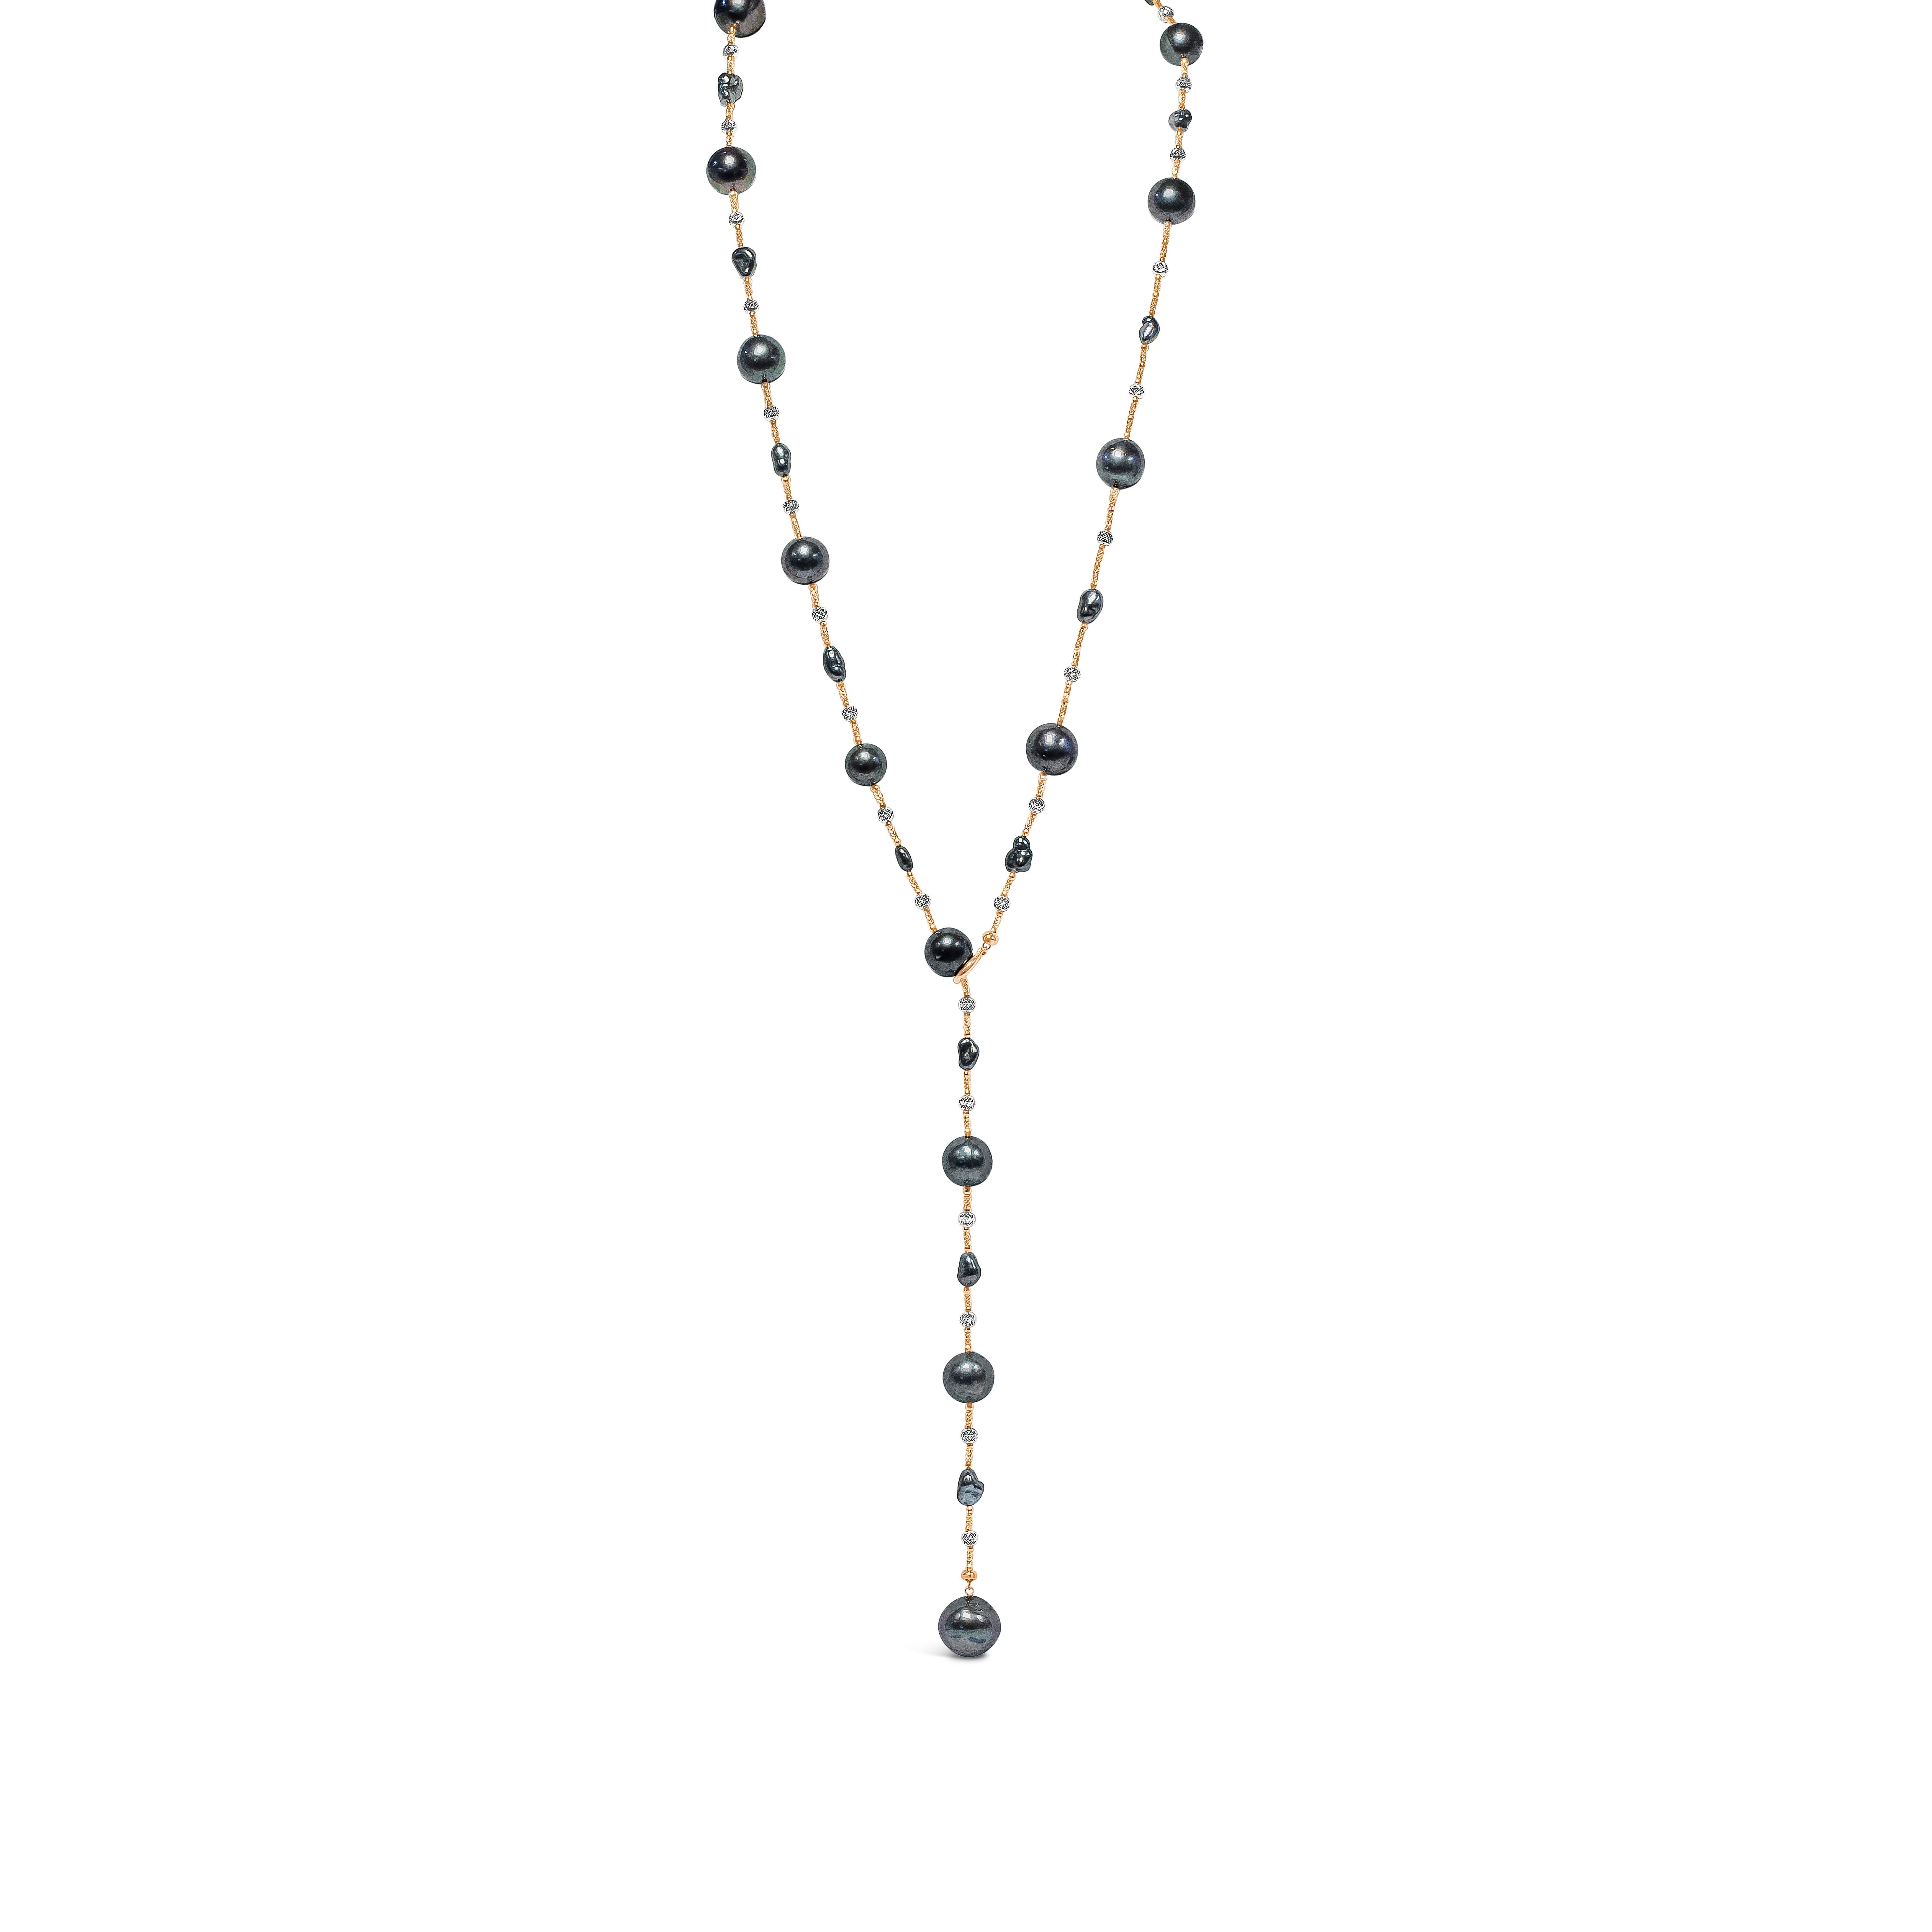 A very versatile necklace showcasing 11-14mm Tahitian pearls, spaced by 18k white gold knots. 32 inches in length and can be used multiple ways as a necklace or bracelet. Made in 18k rose gold.

Style available in different price ranges. Prices are